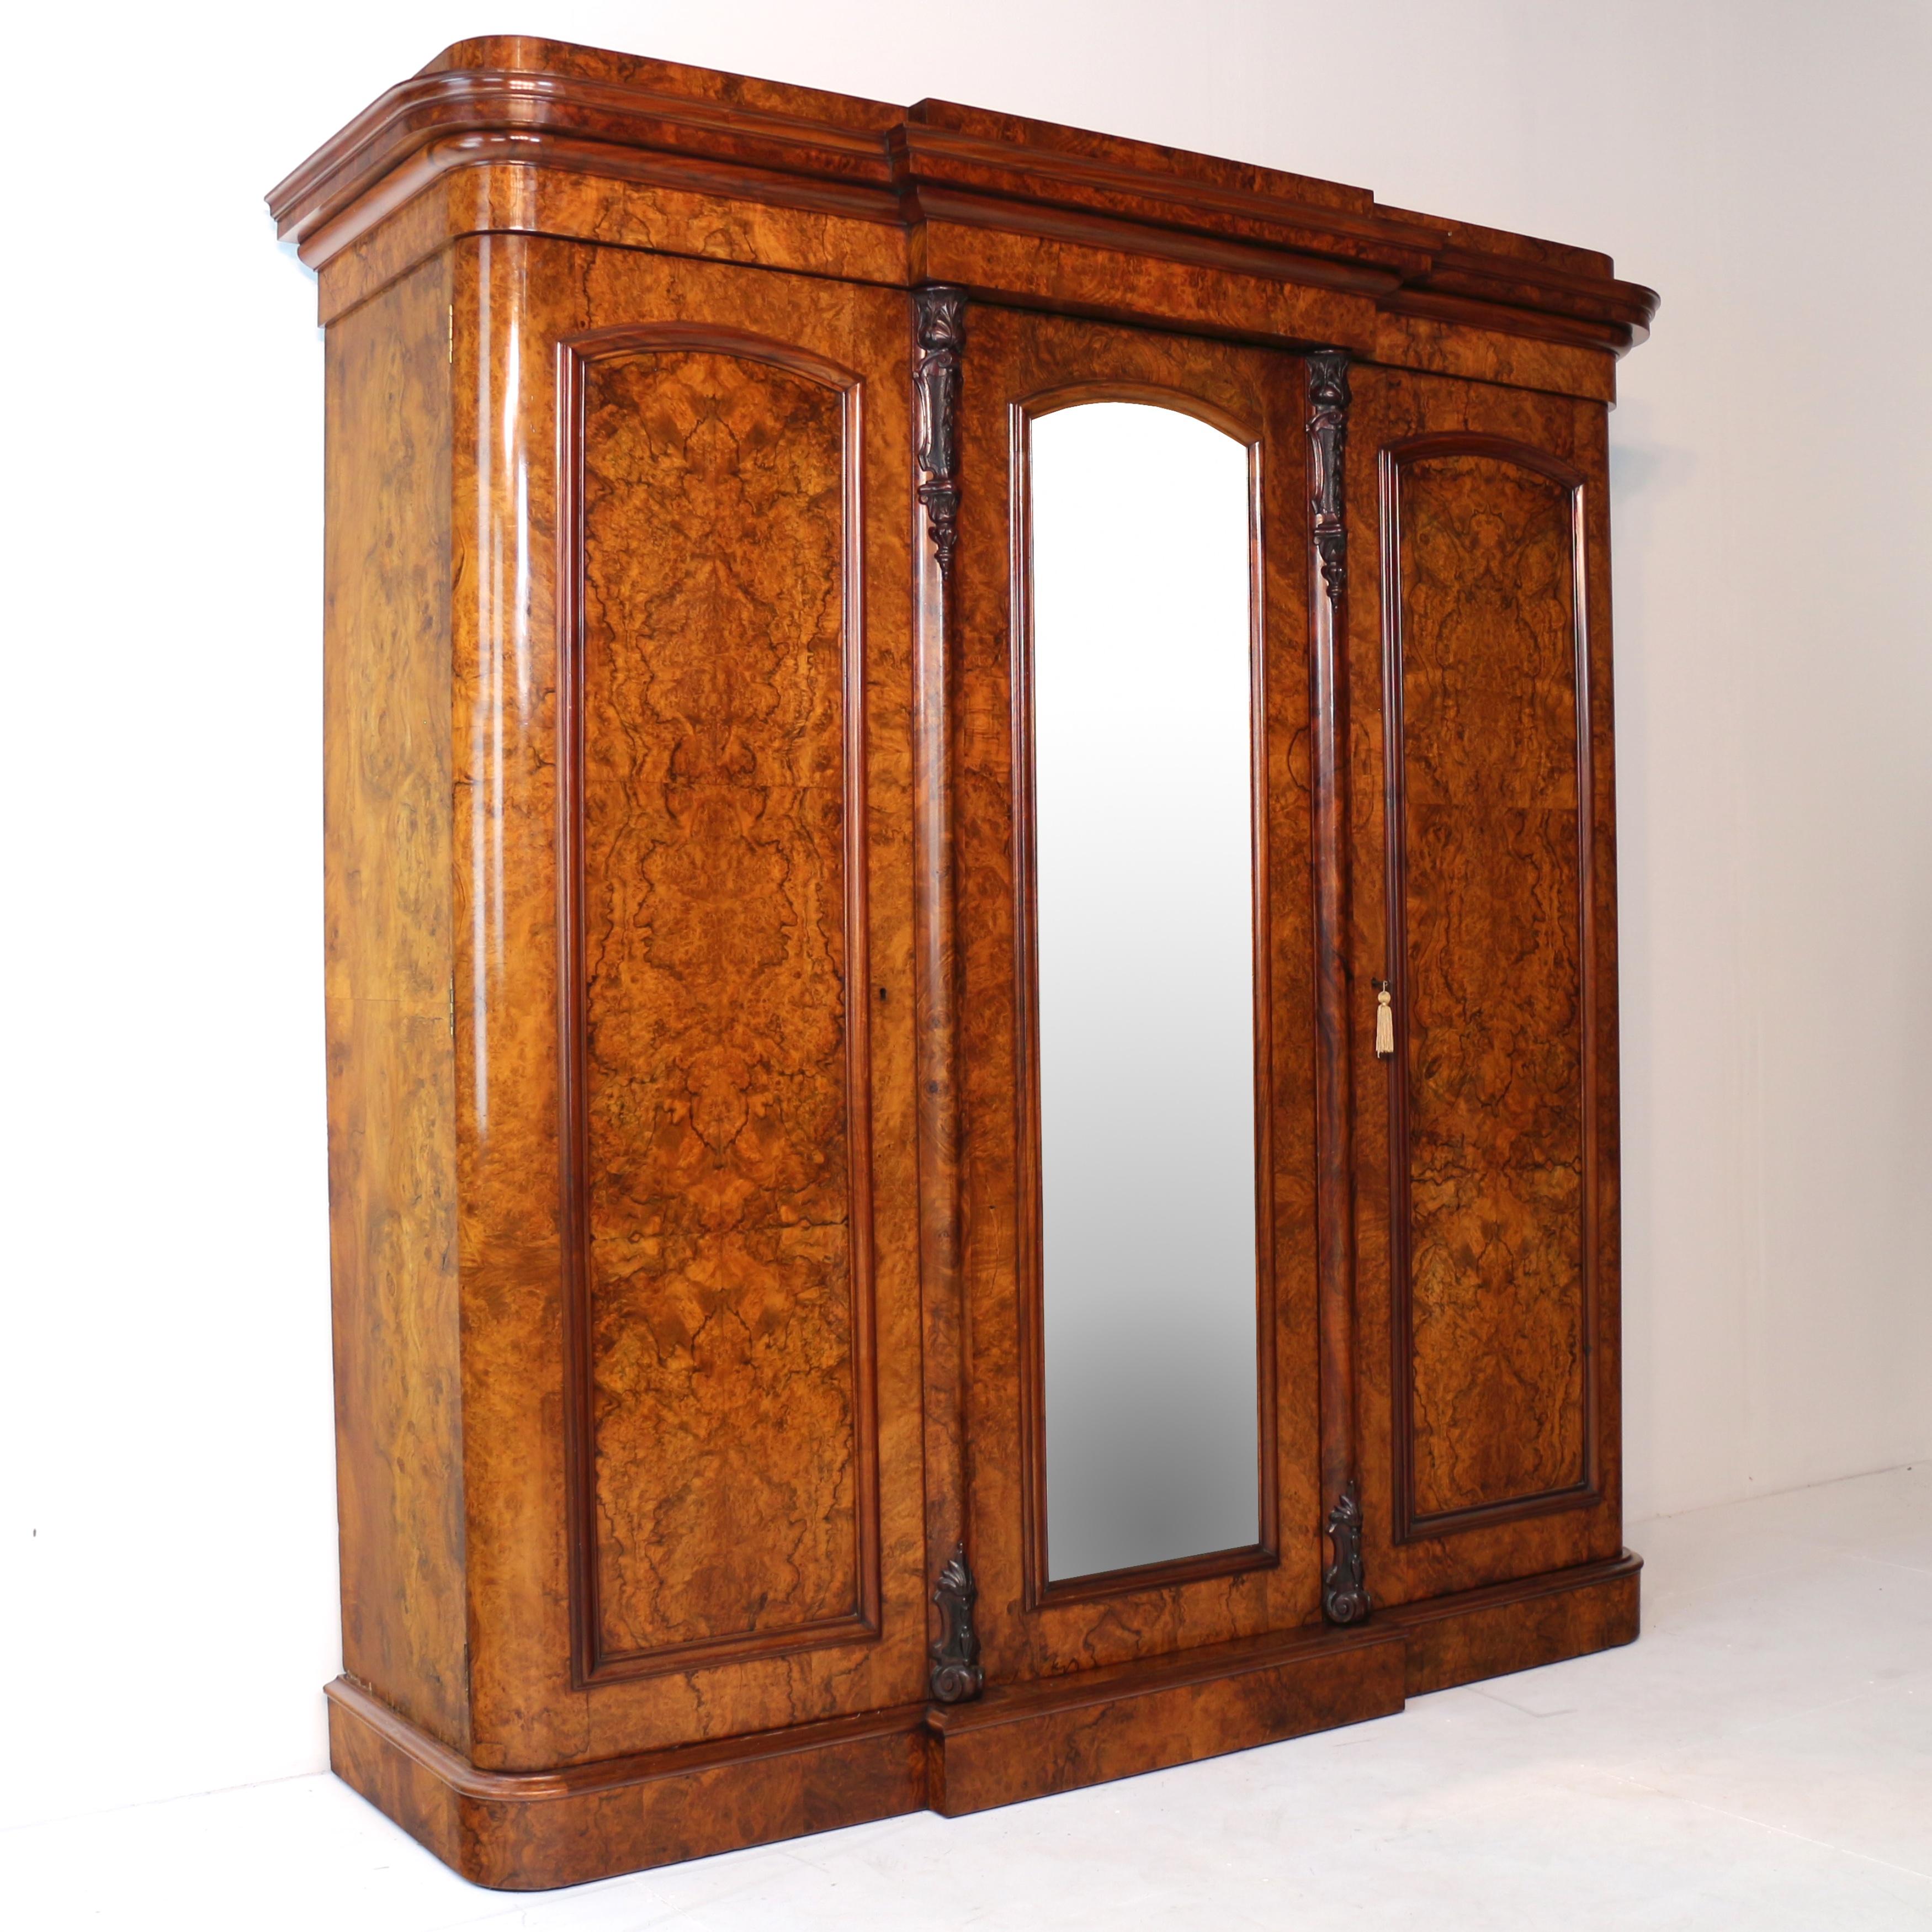 A fabulous Victorian breakfront fitted wardrobe of super quality and possibly by Wylie & Lochhead of Glasgow. Featuring well figured bookmatched burr walnut veneers to the front and sides and crisply carved acanthus leaf & harebell carved corbels.